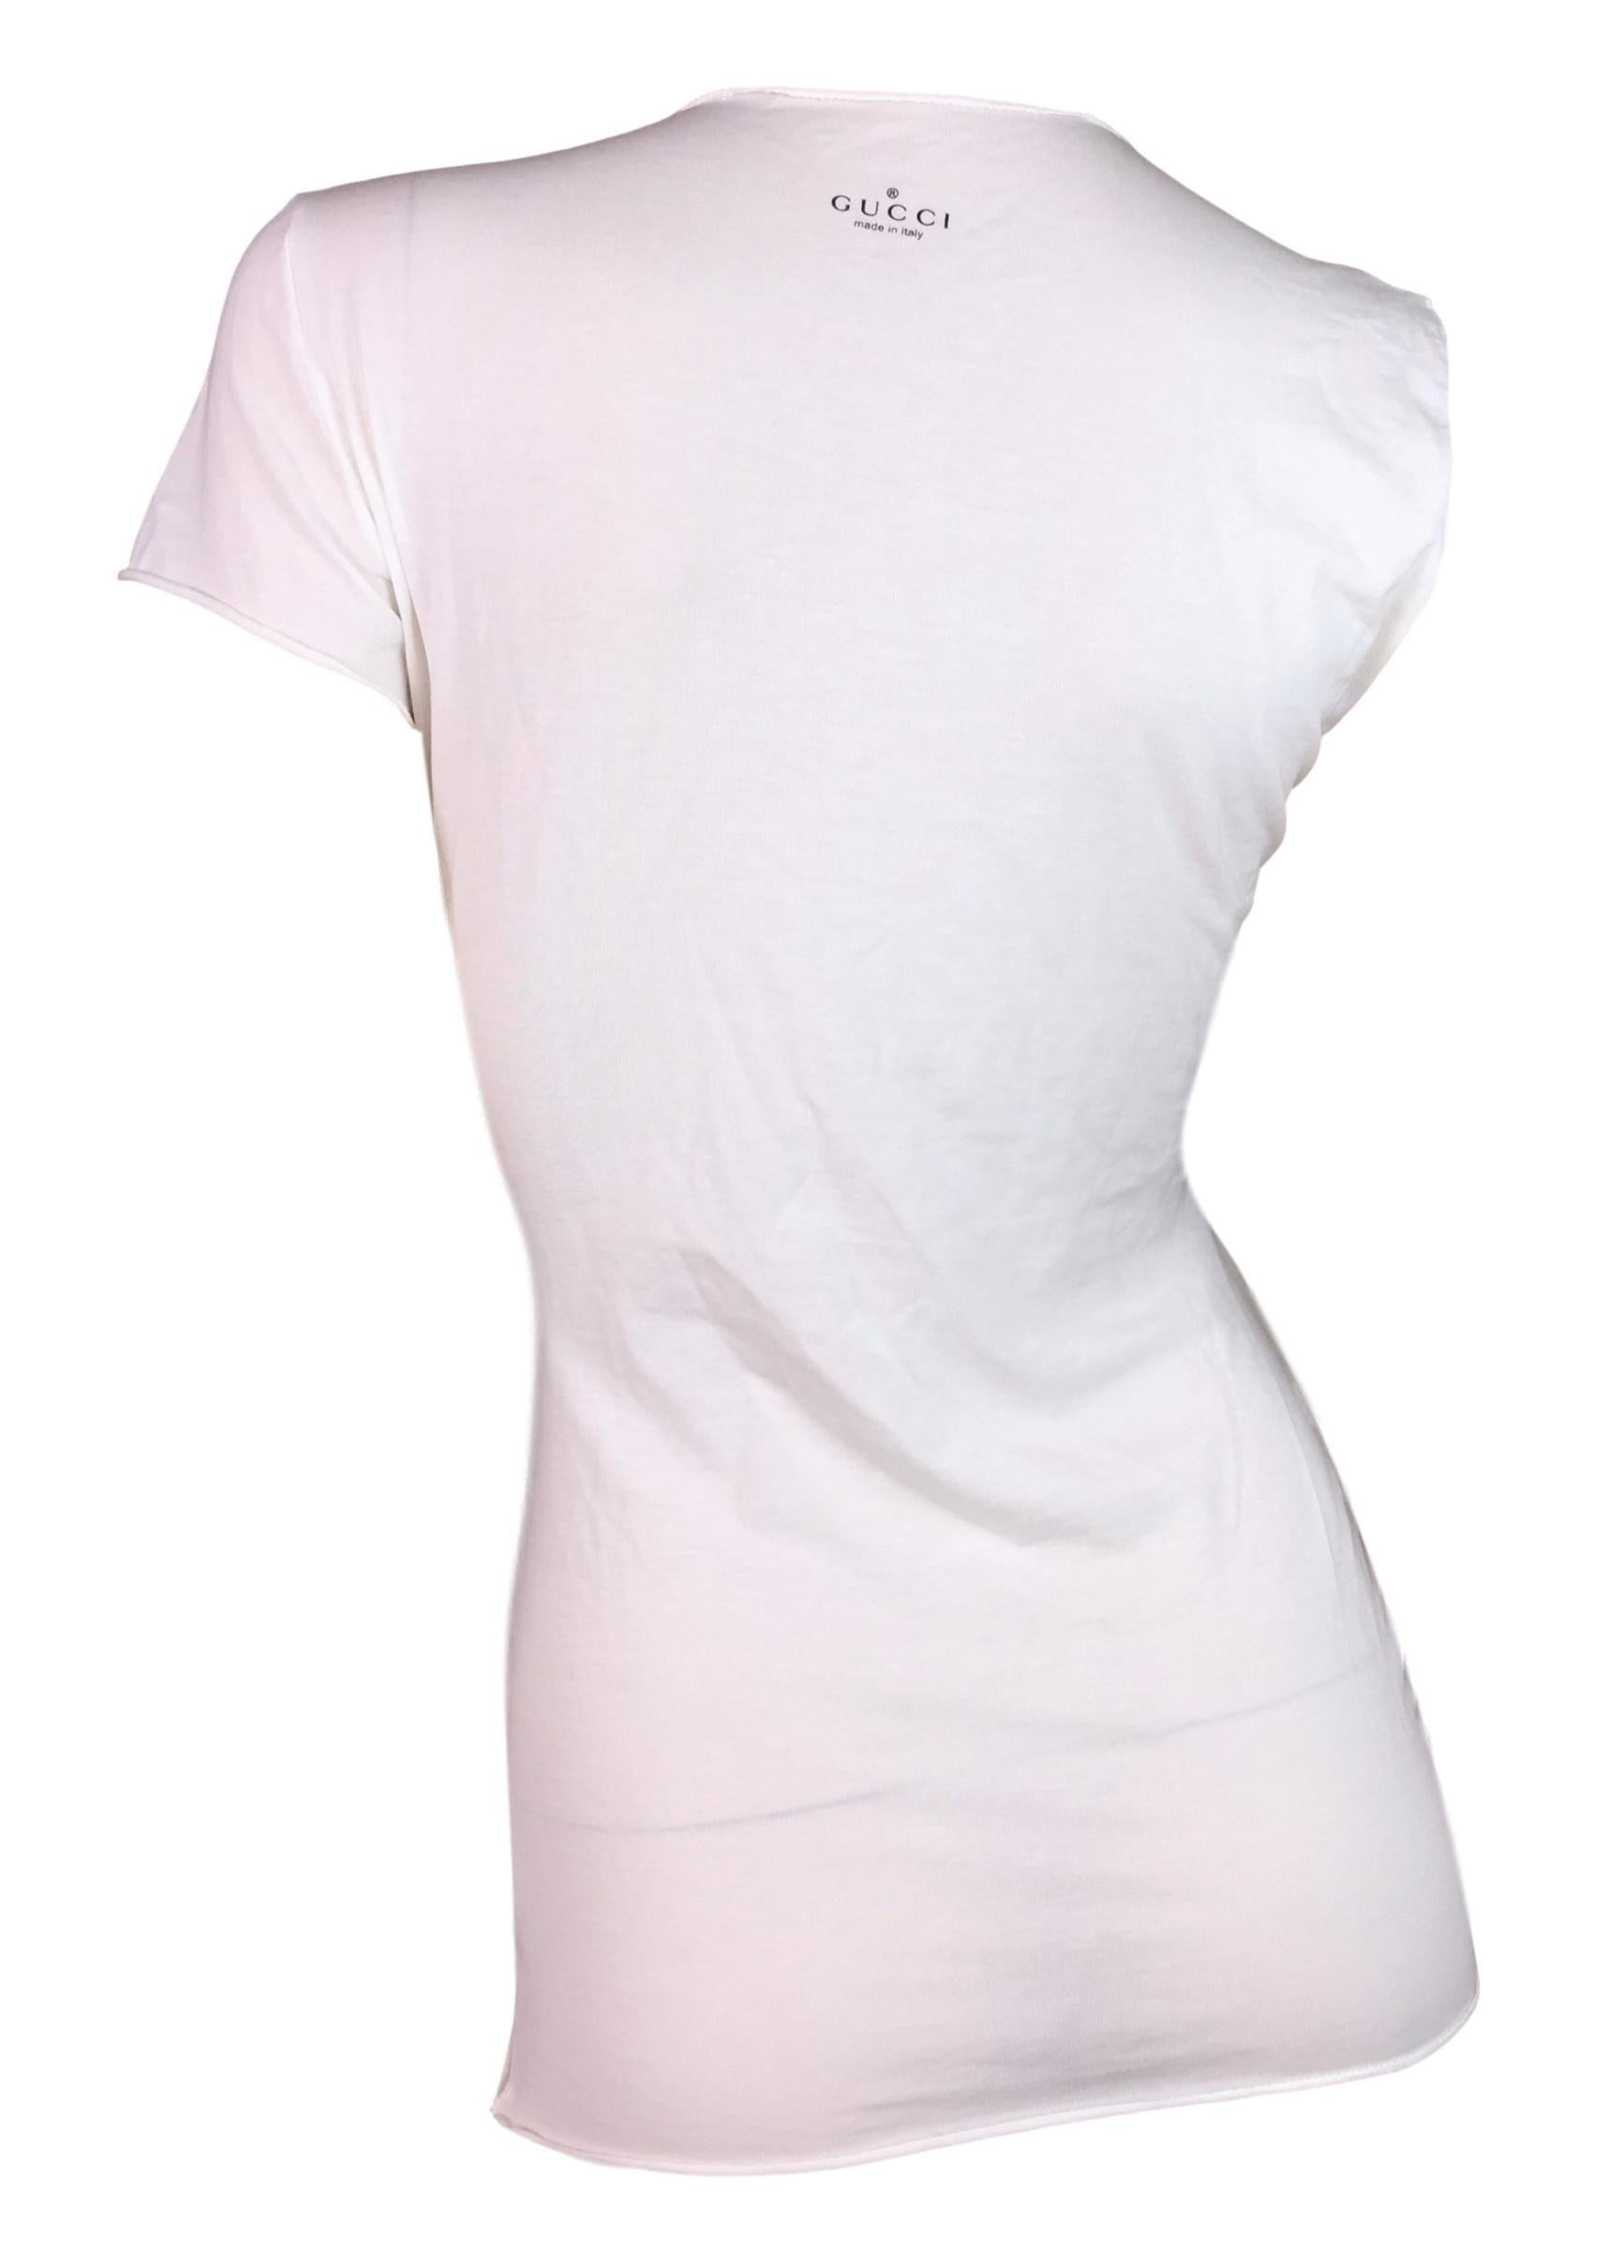 S/S 2001 Gucci Tom Ford Runway Sheer White Cut-Out Crop Top T-Shirt 42 In Good Condition In Yukon, OK